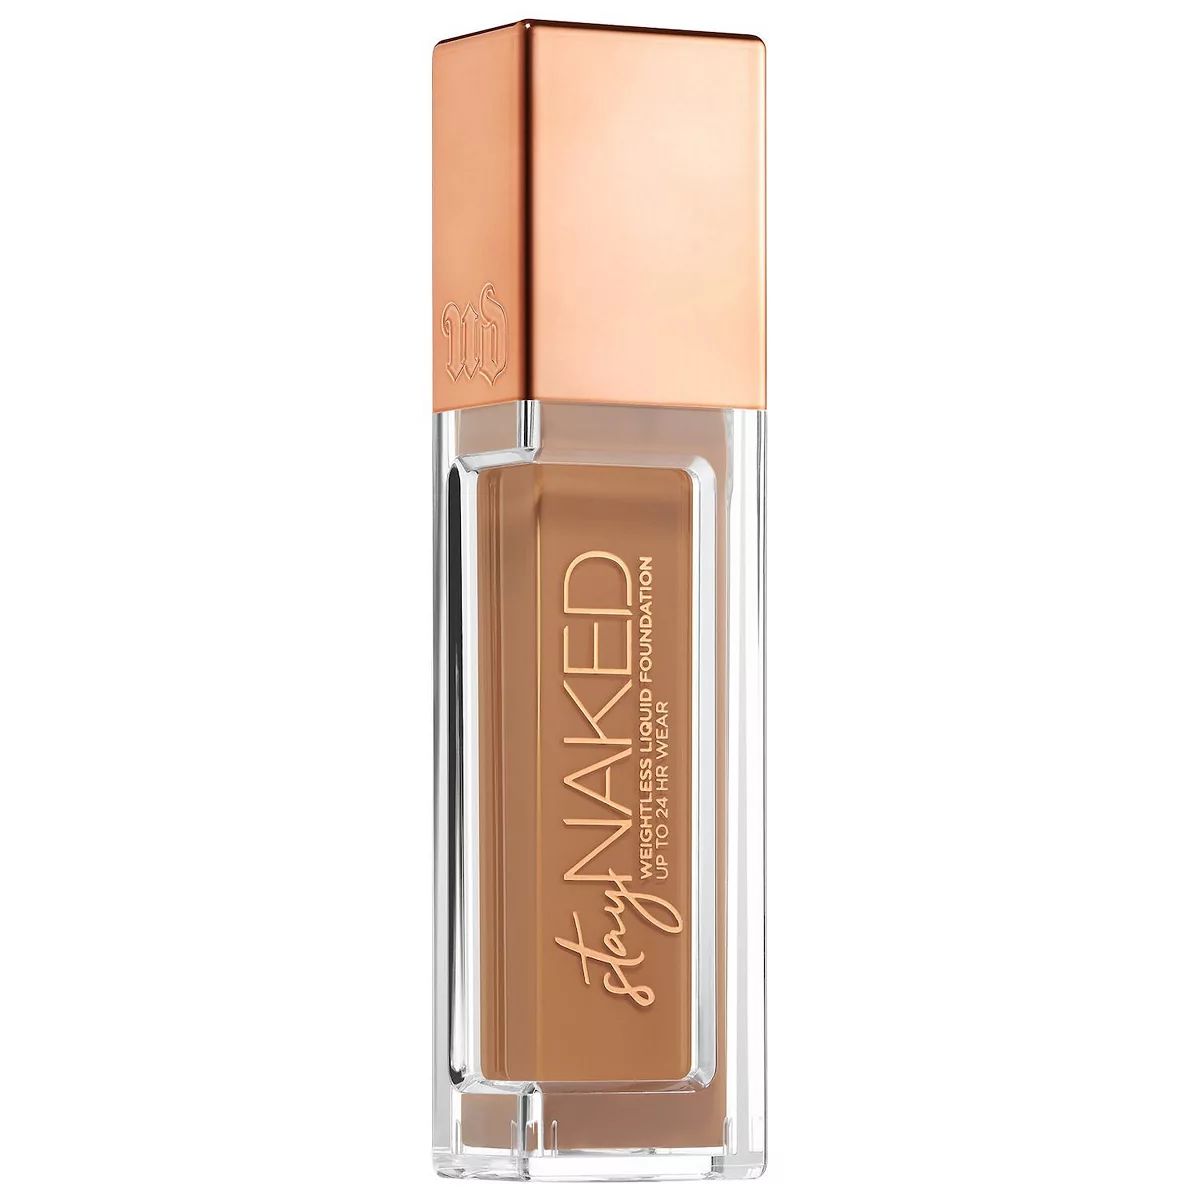 Urban Decay Stay Naked Weightless Foundation | Kohl's